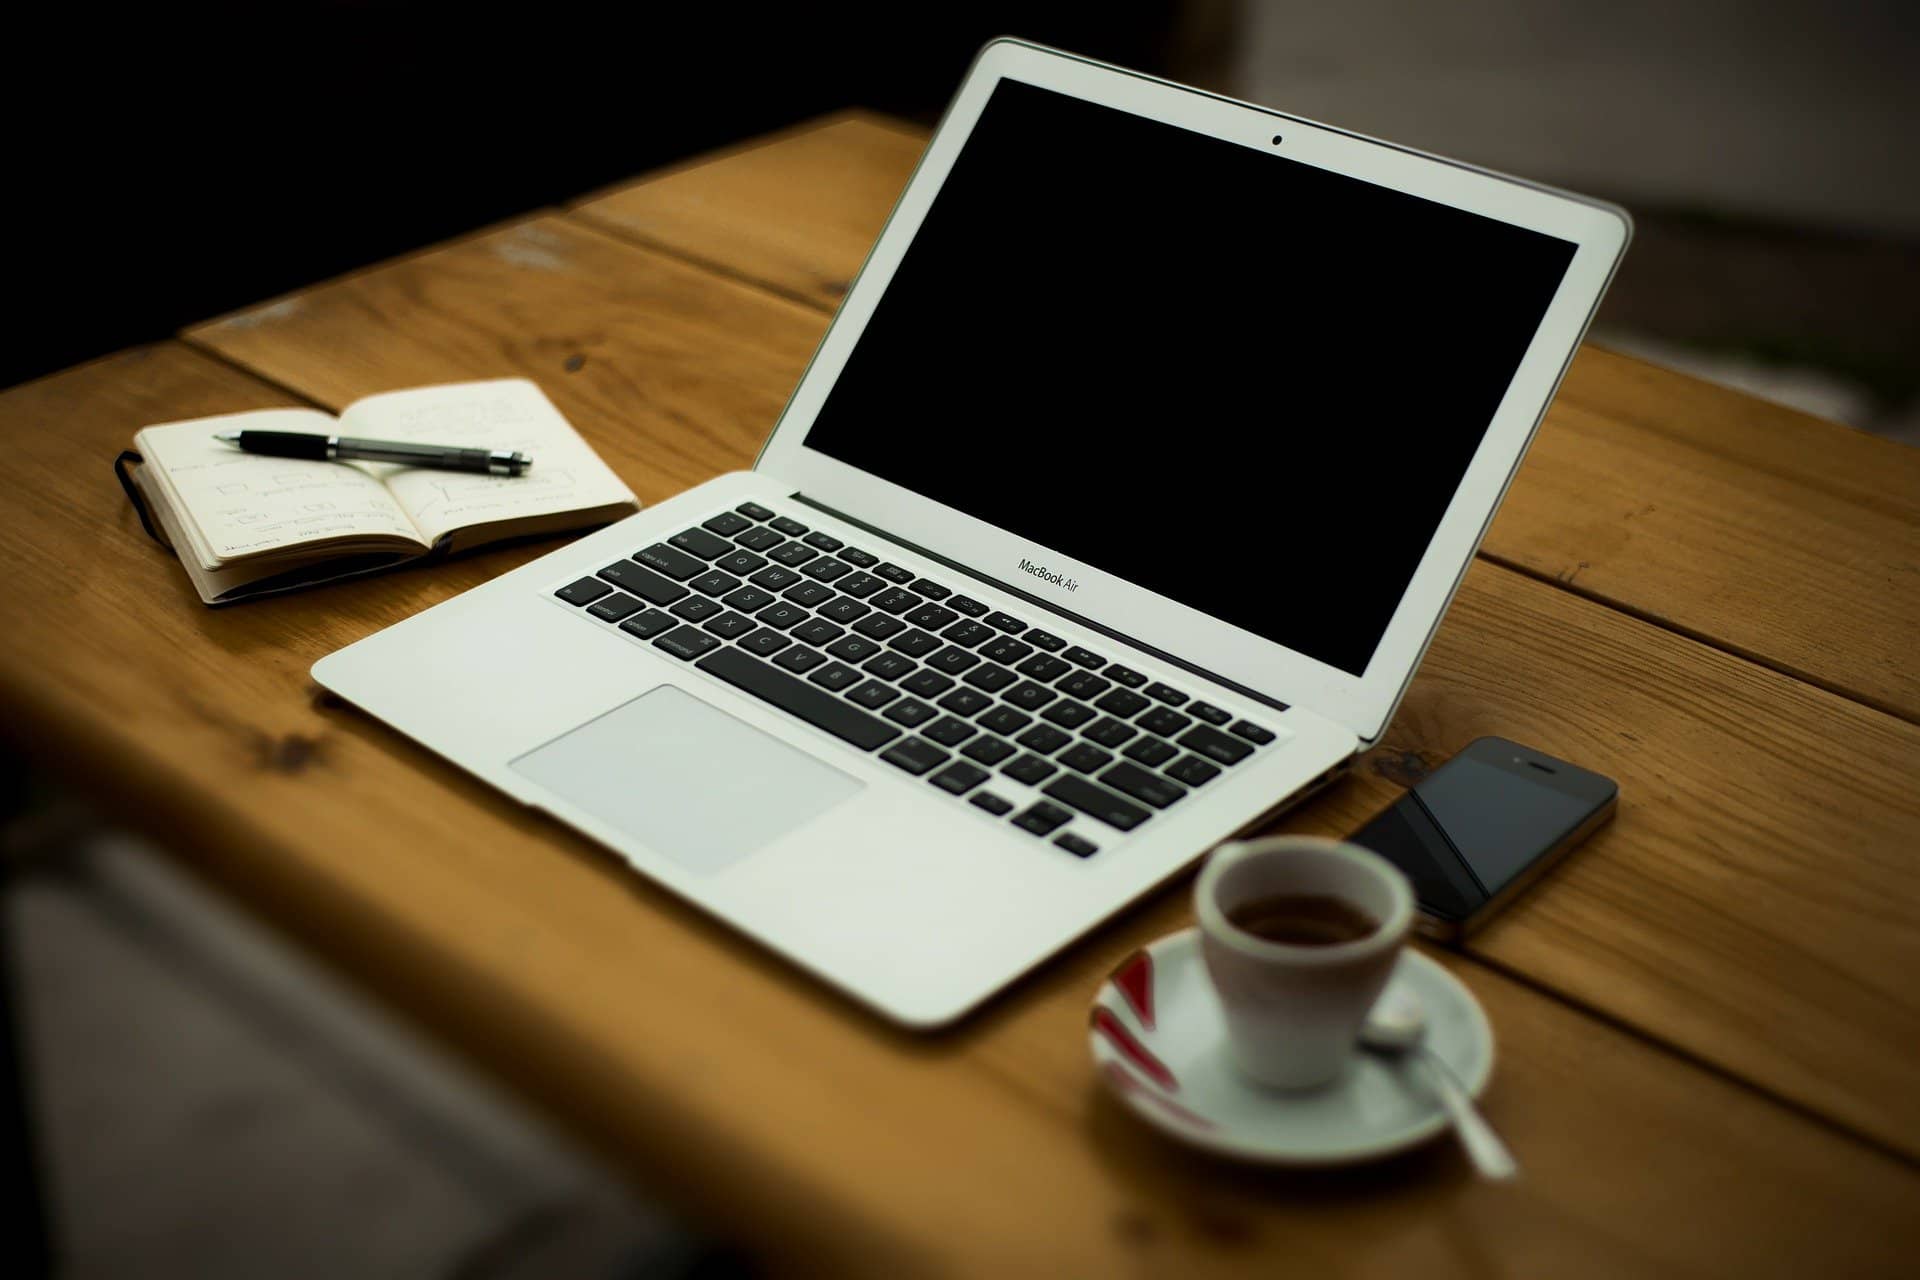 A laptop with a black screen, a smartphone, a blog template notebook with a pen, and a cup of coffee on a wooden table.